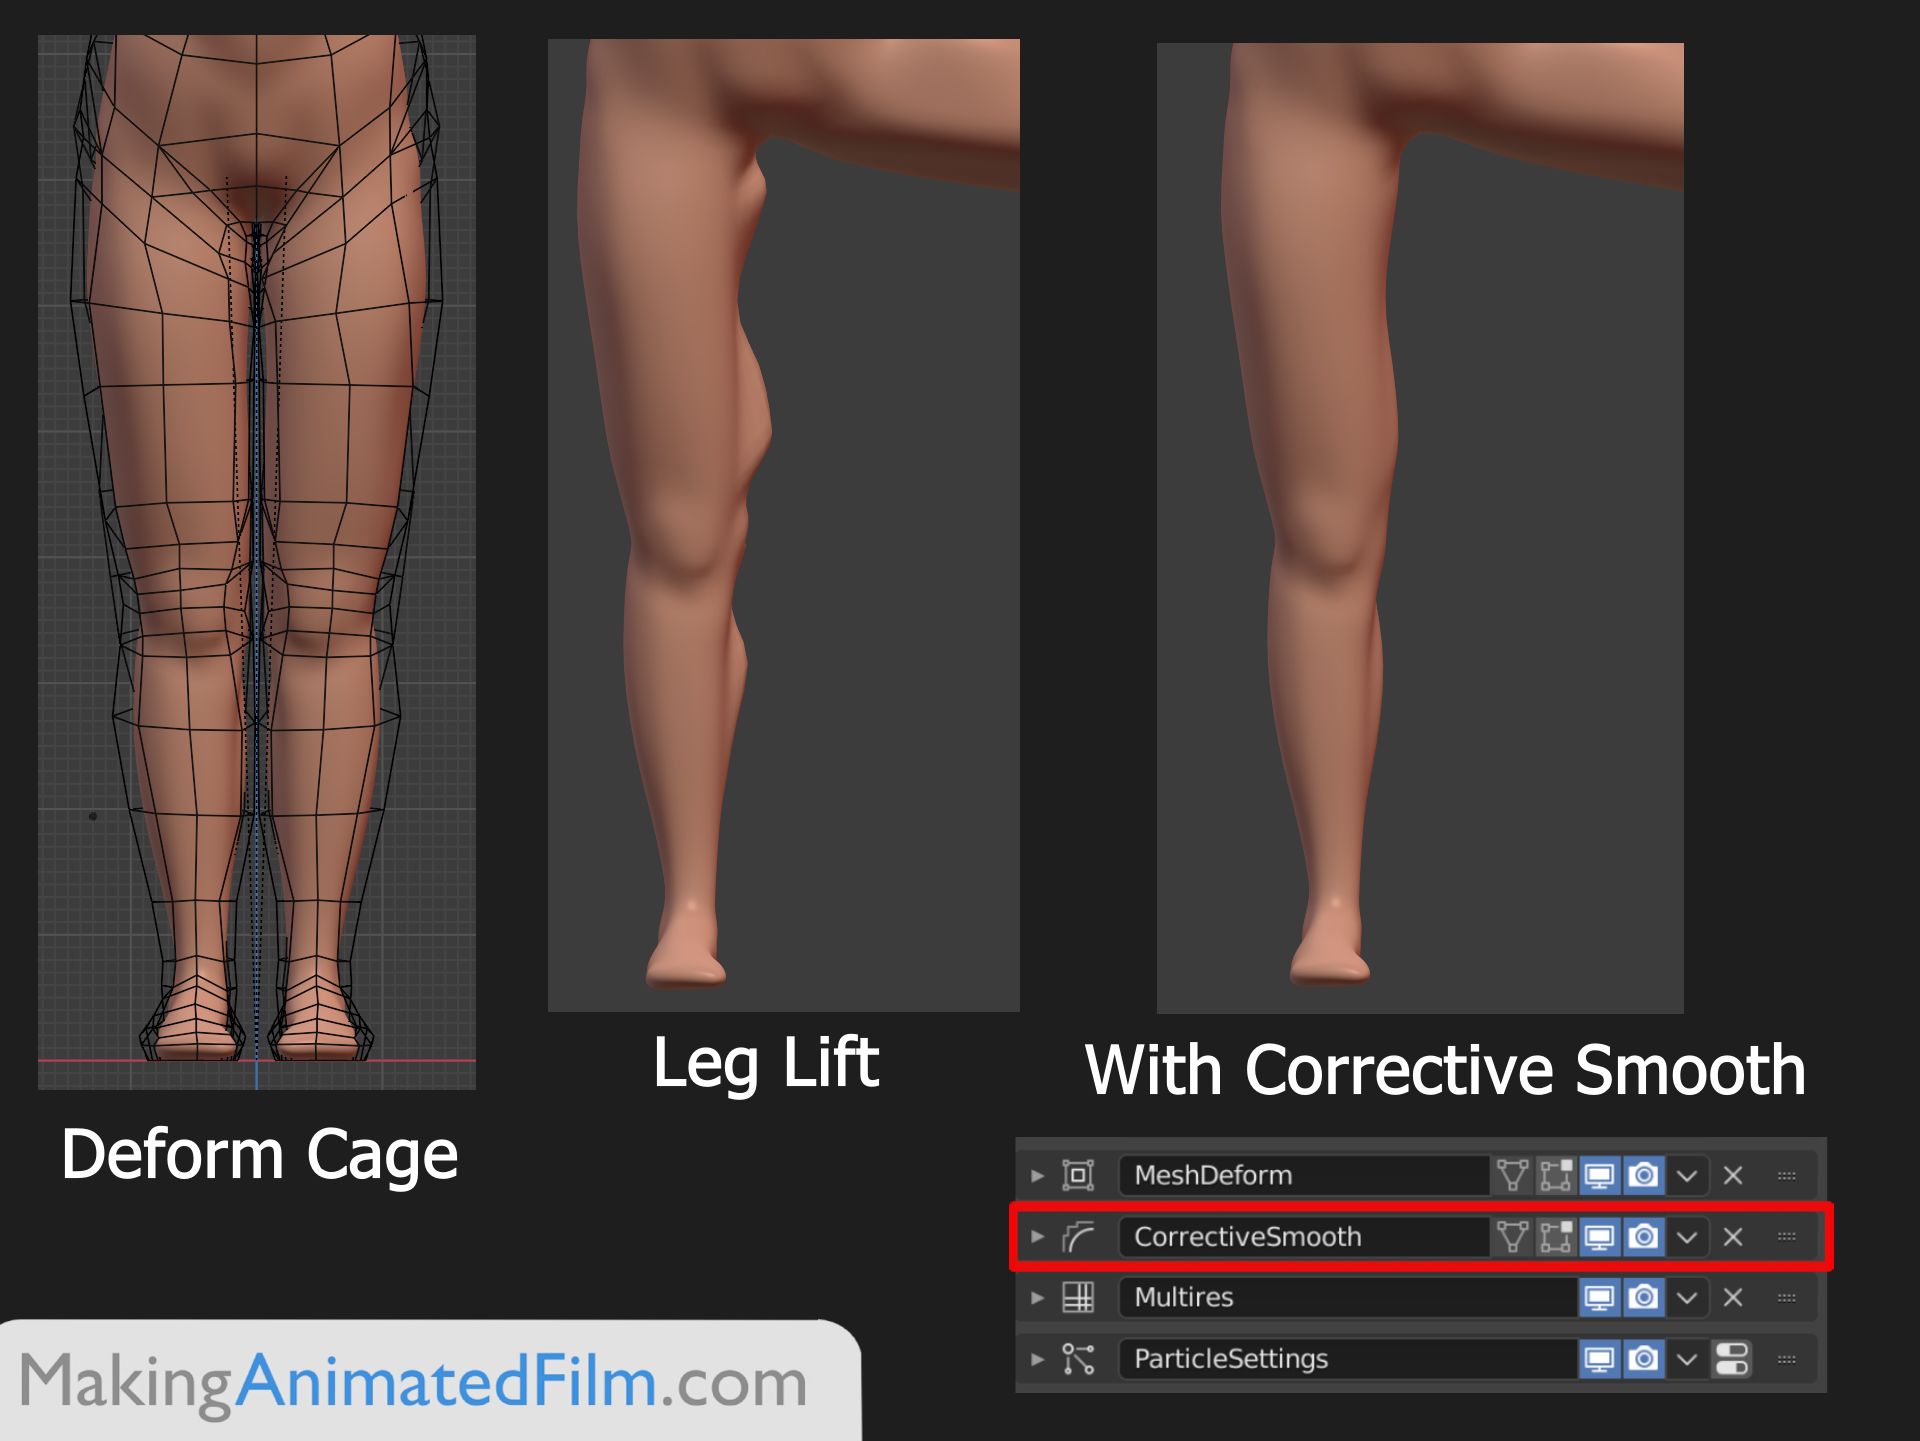 Showing how the Corrective Smooth modified fixes the precision errors of the deformation cage